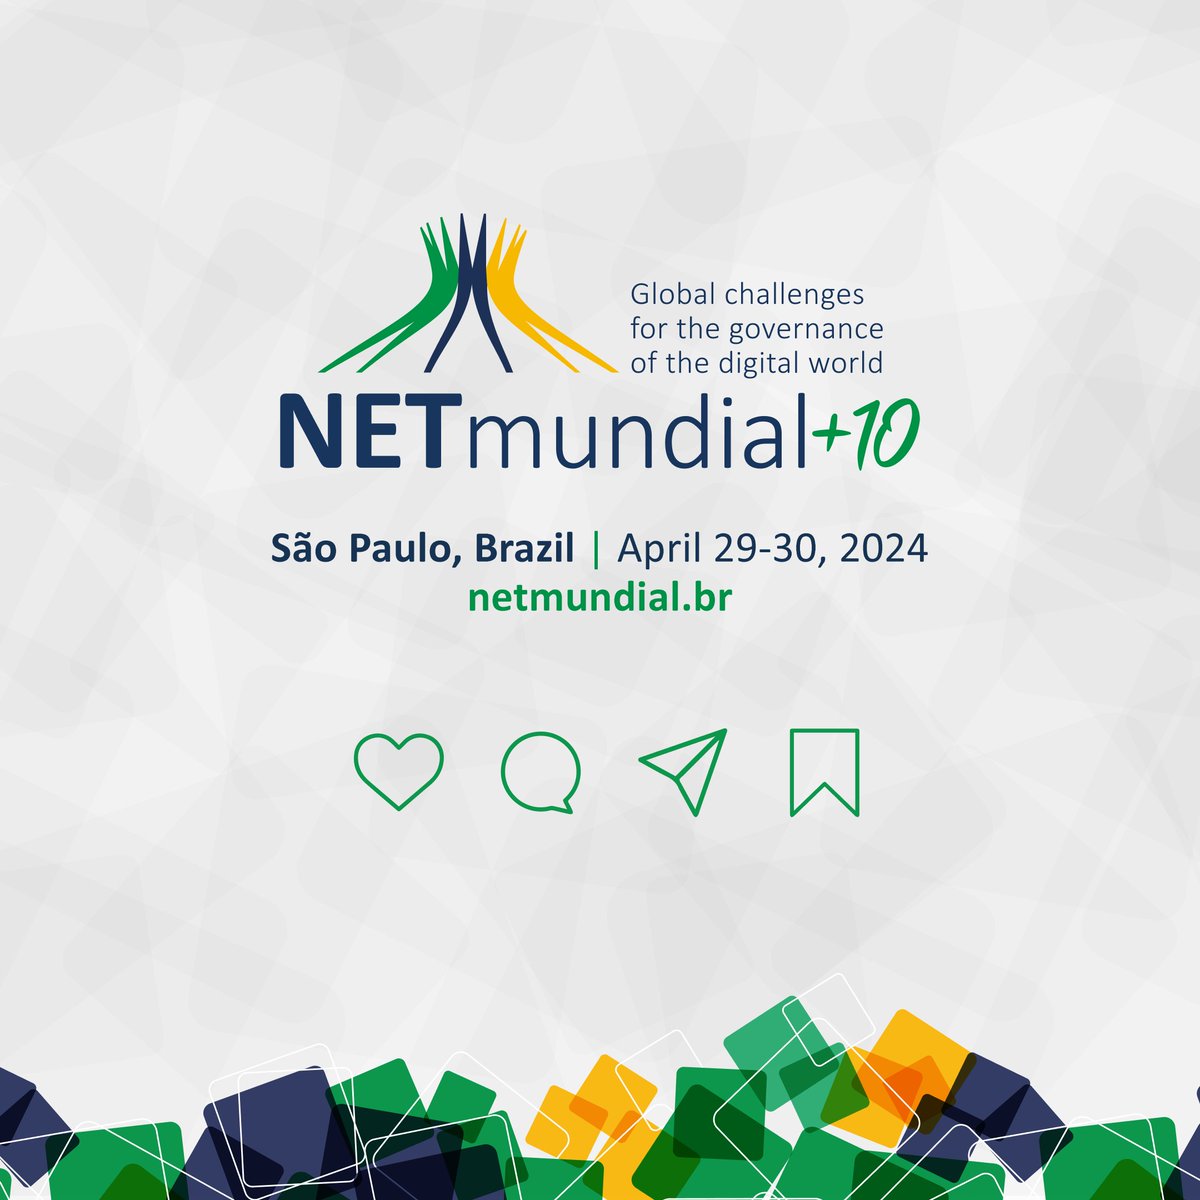 Registration for attendance has now closed, but you can still follow the event online. Just register on our website! #NETmundial #Technology #Internet #Innovation